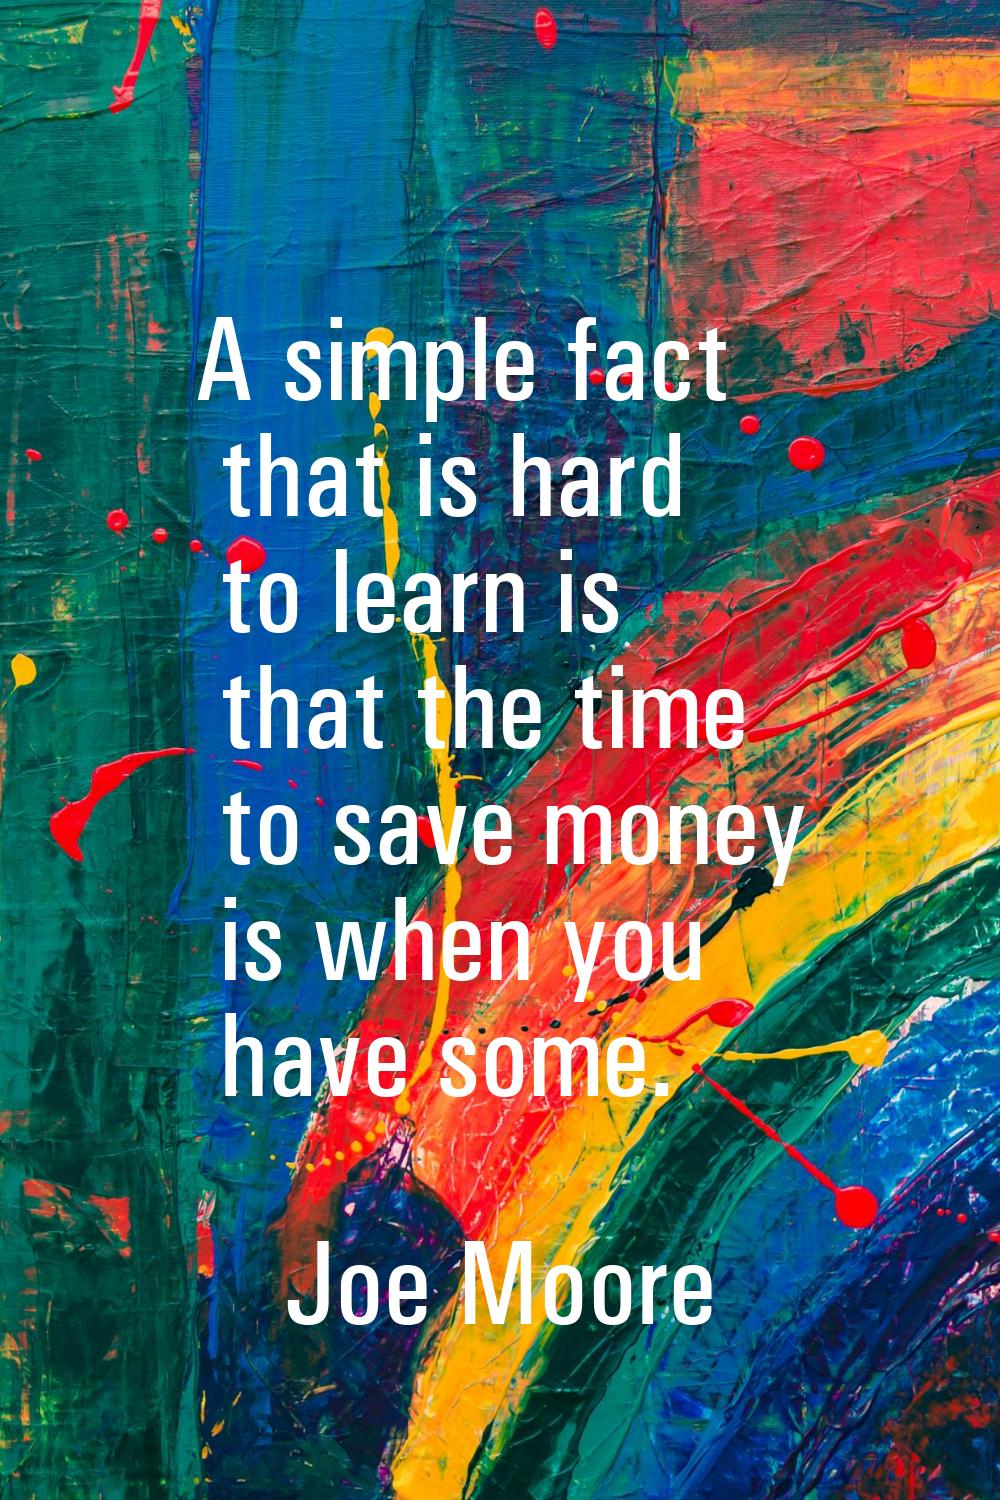 A simple fact that is hard to learn is that the time to save money is when you have some.